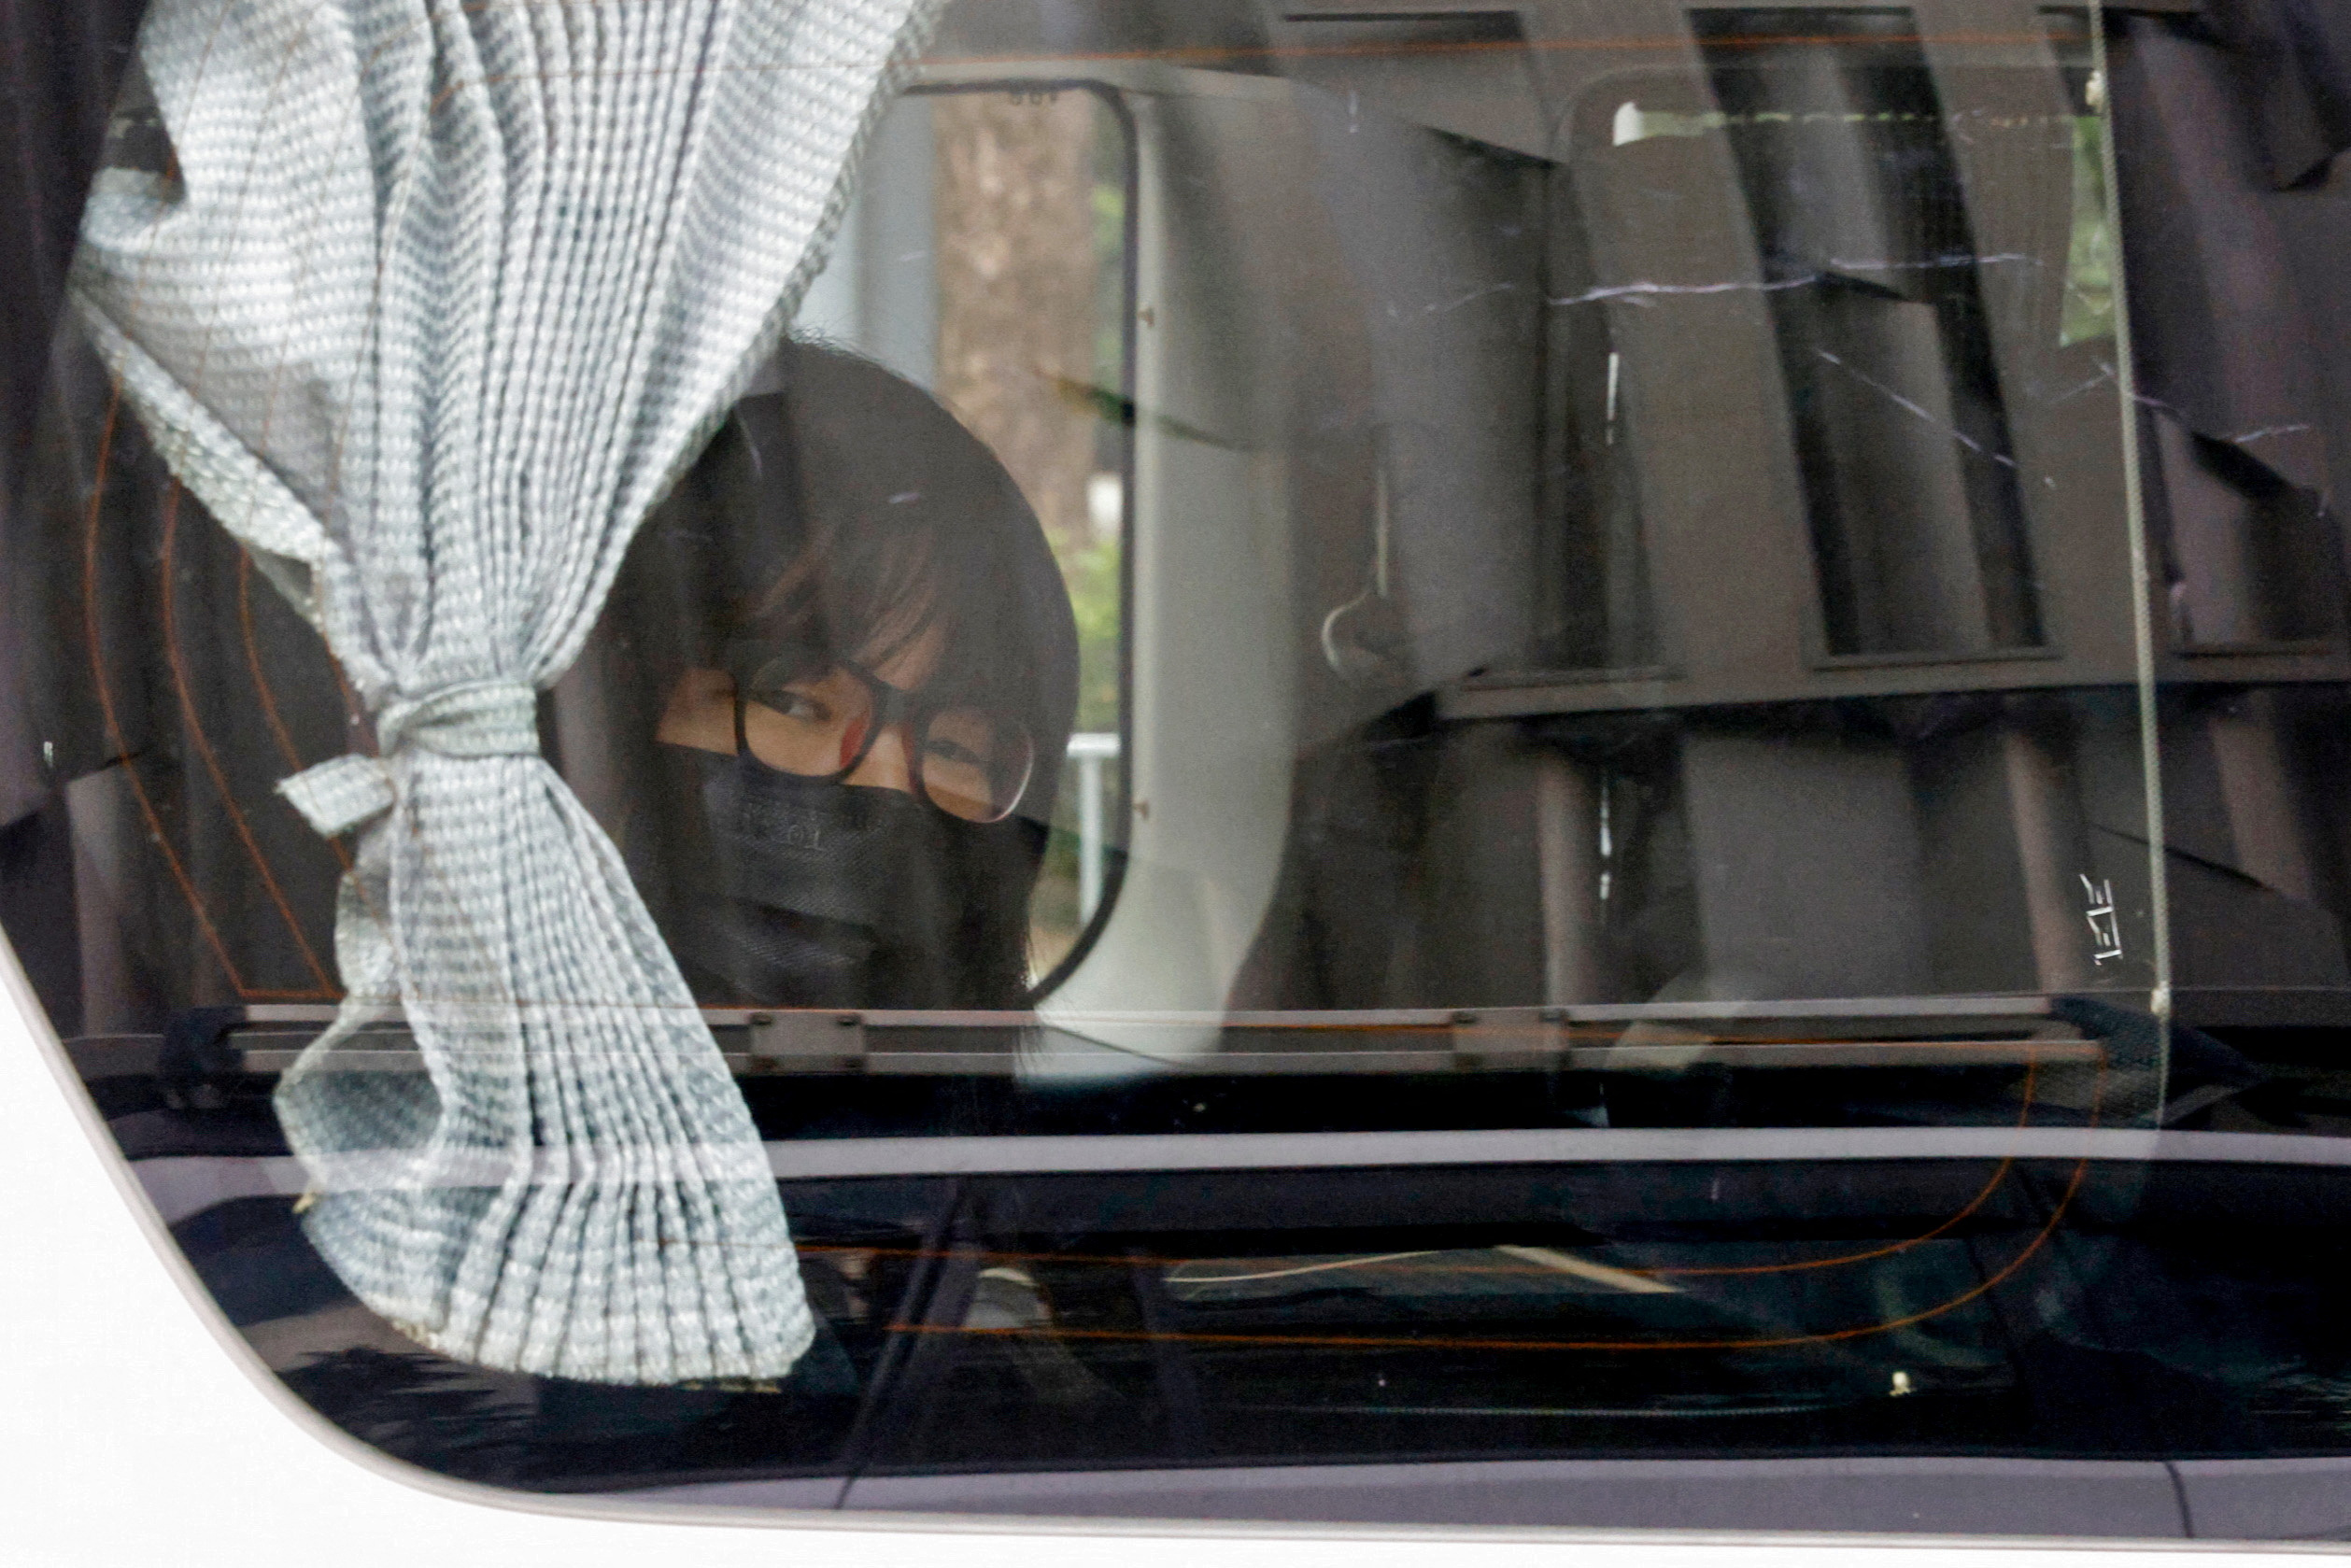 Hong Kong Alliance in Support of Patriotic Democratic Movements of China Vice-Chairwoman Tonyee Chow is seen inside a vehicle after being detained in Hong Kong